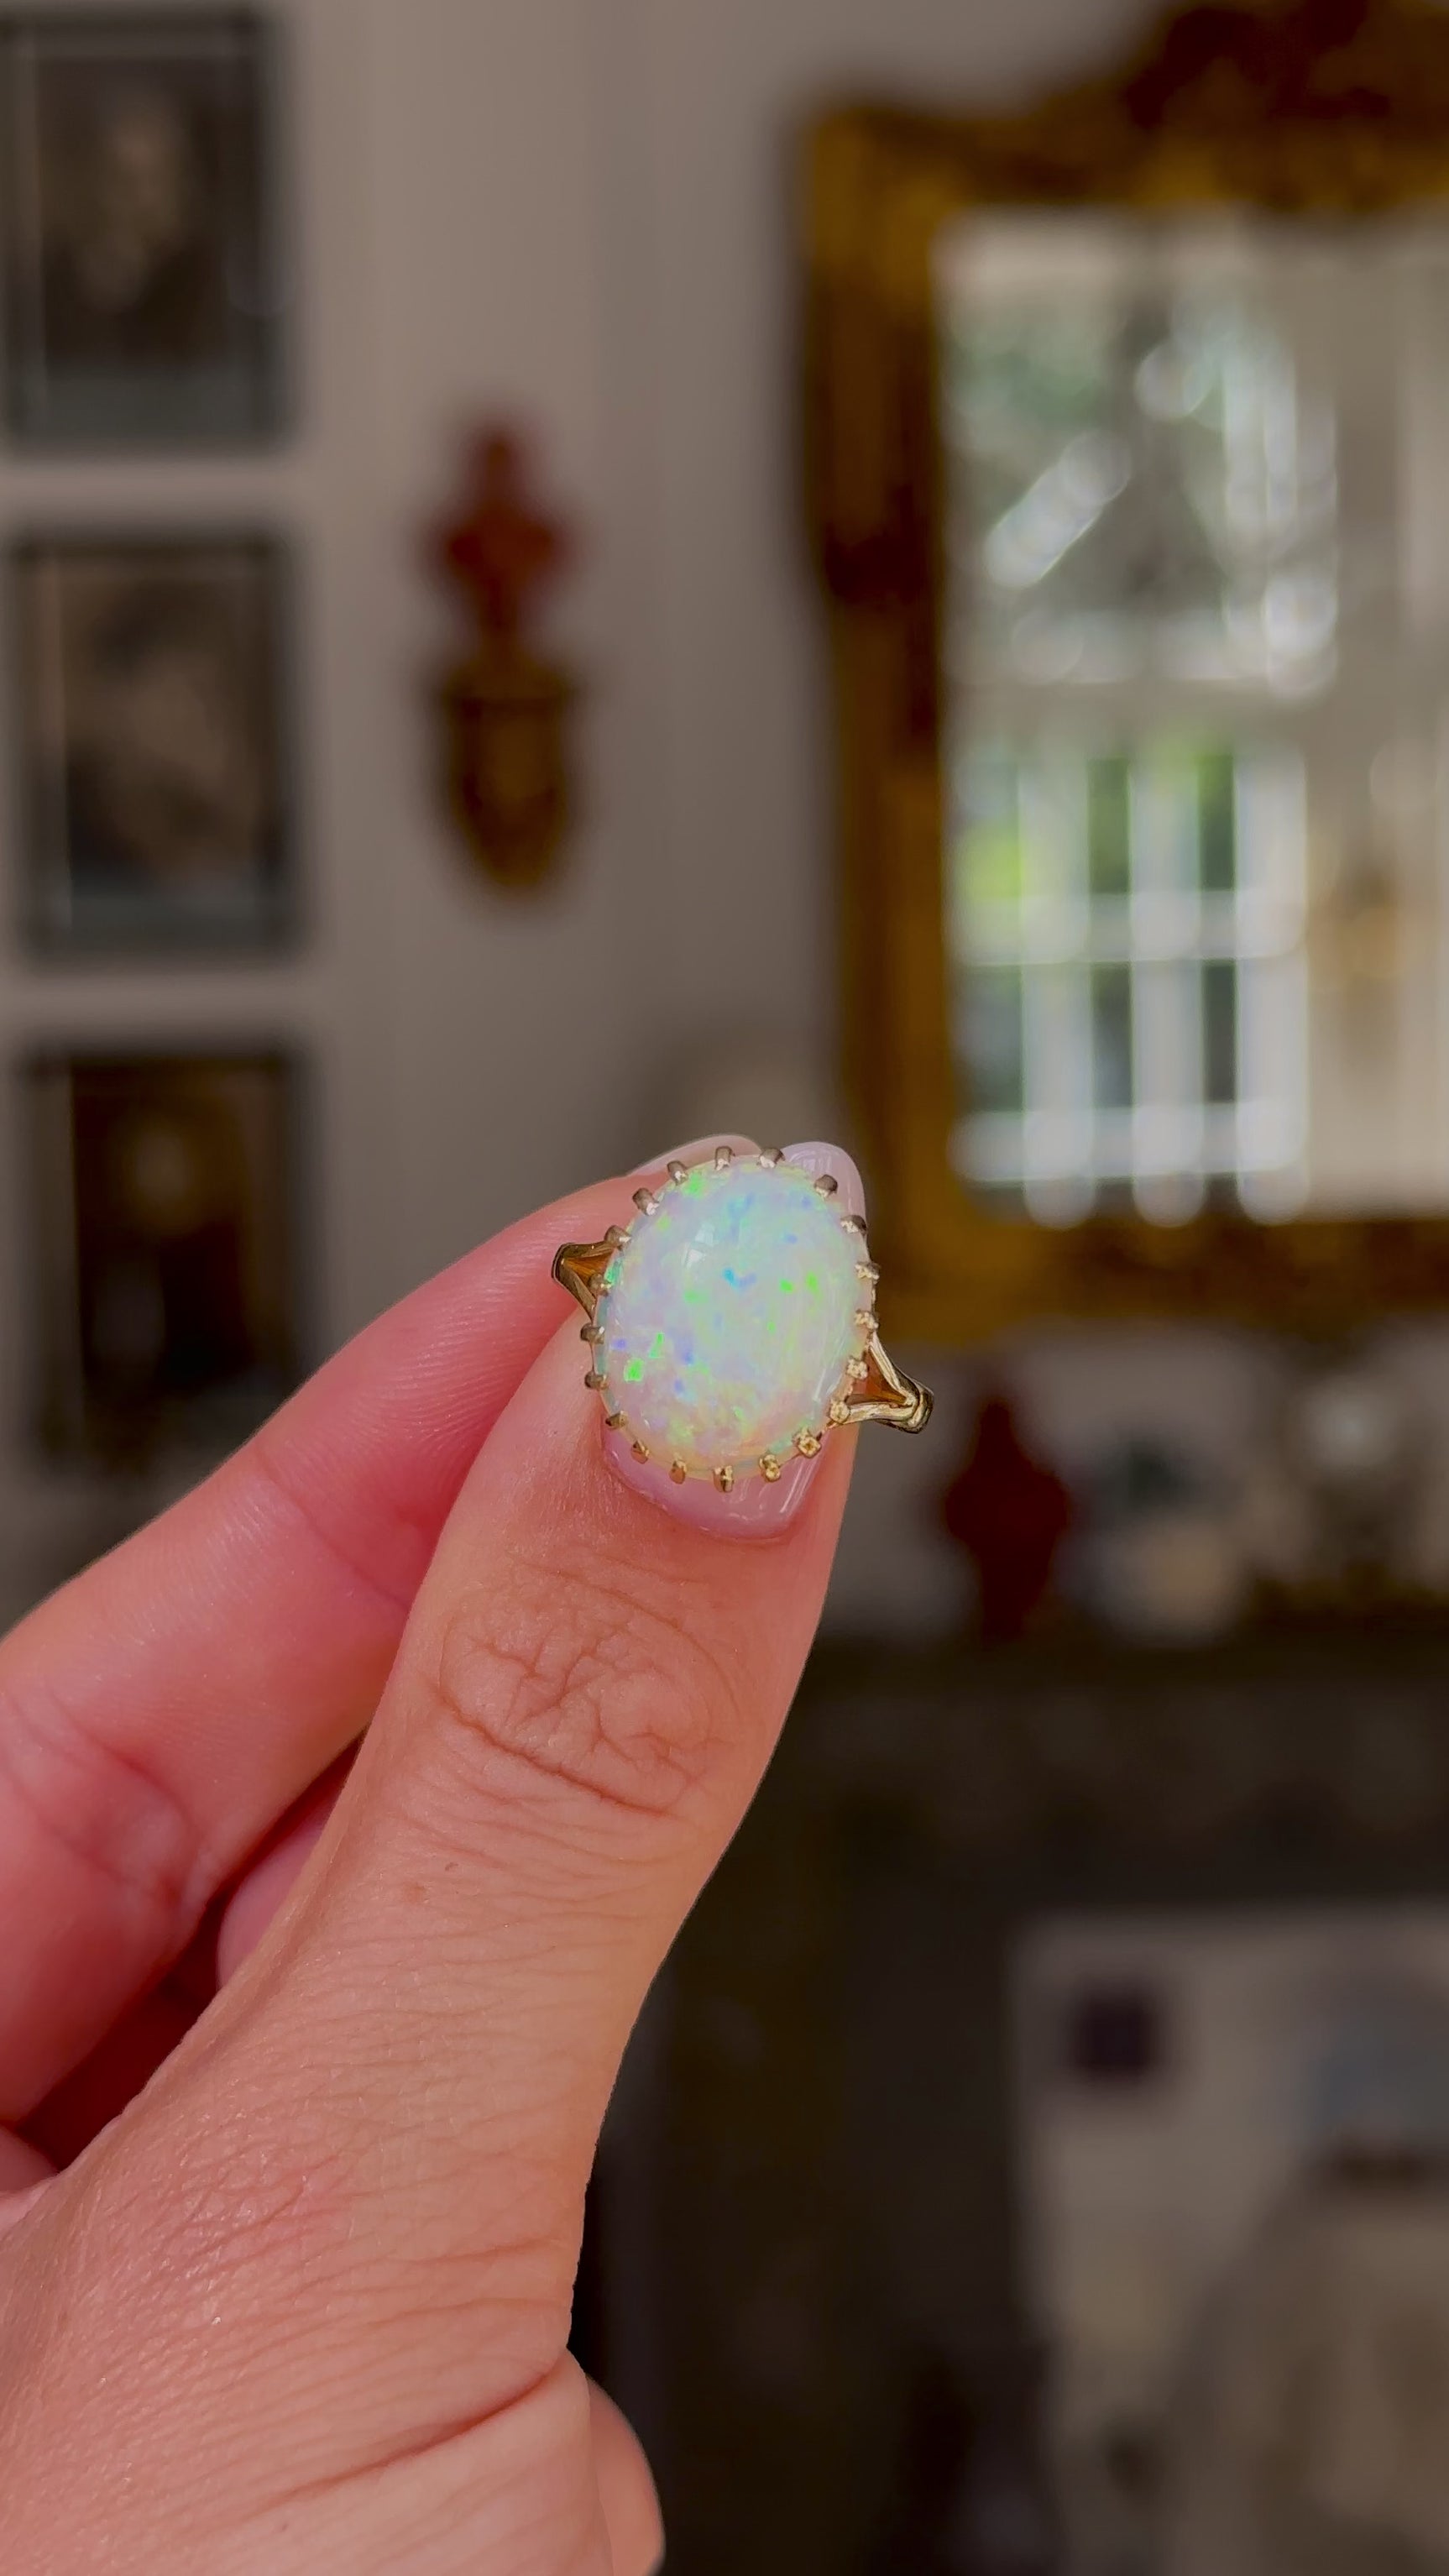 cabochon white opal cocktail ring with 18ct yellow gold band, held in fingers and rotated to give perspective, front view. 